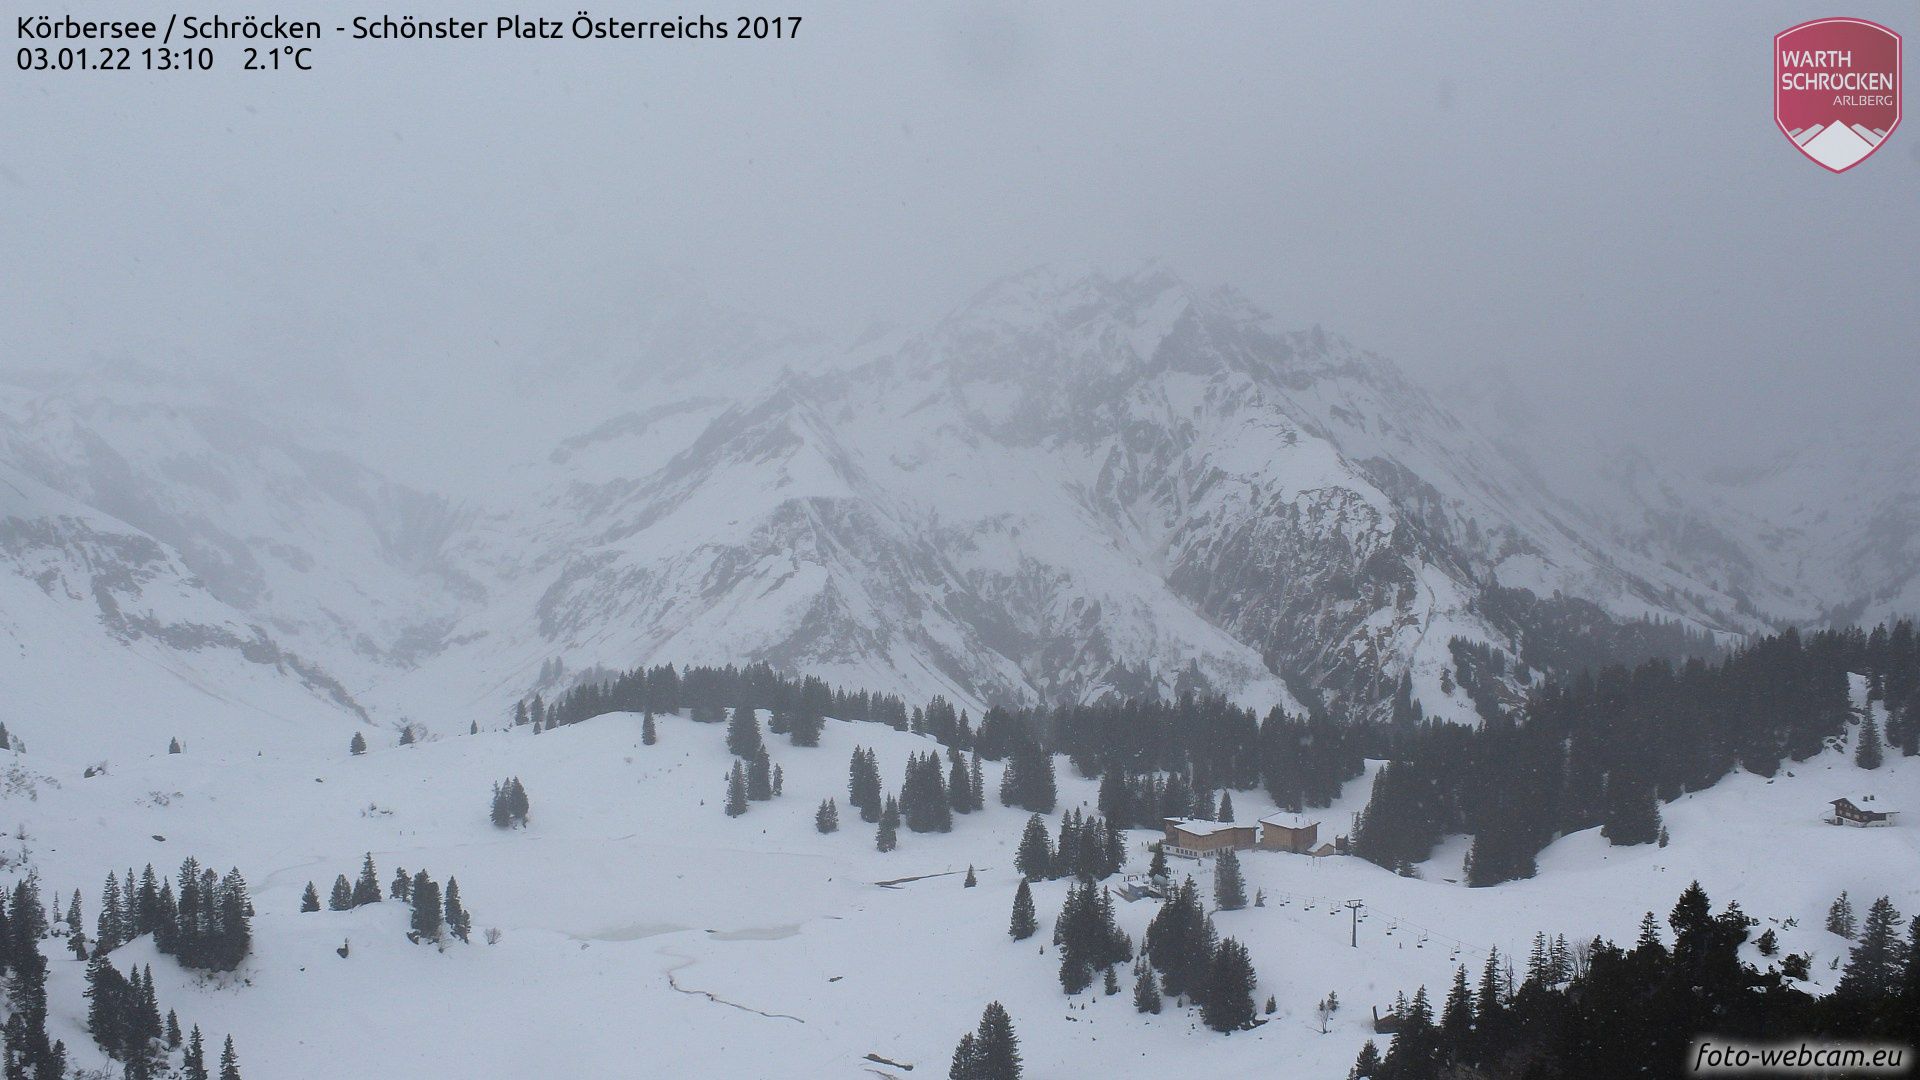 Just like today, tomorrow it will remain cloudy in the northern areas, like here in Warth-Schröcken (foto-webcam.eu)